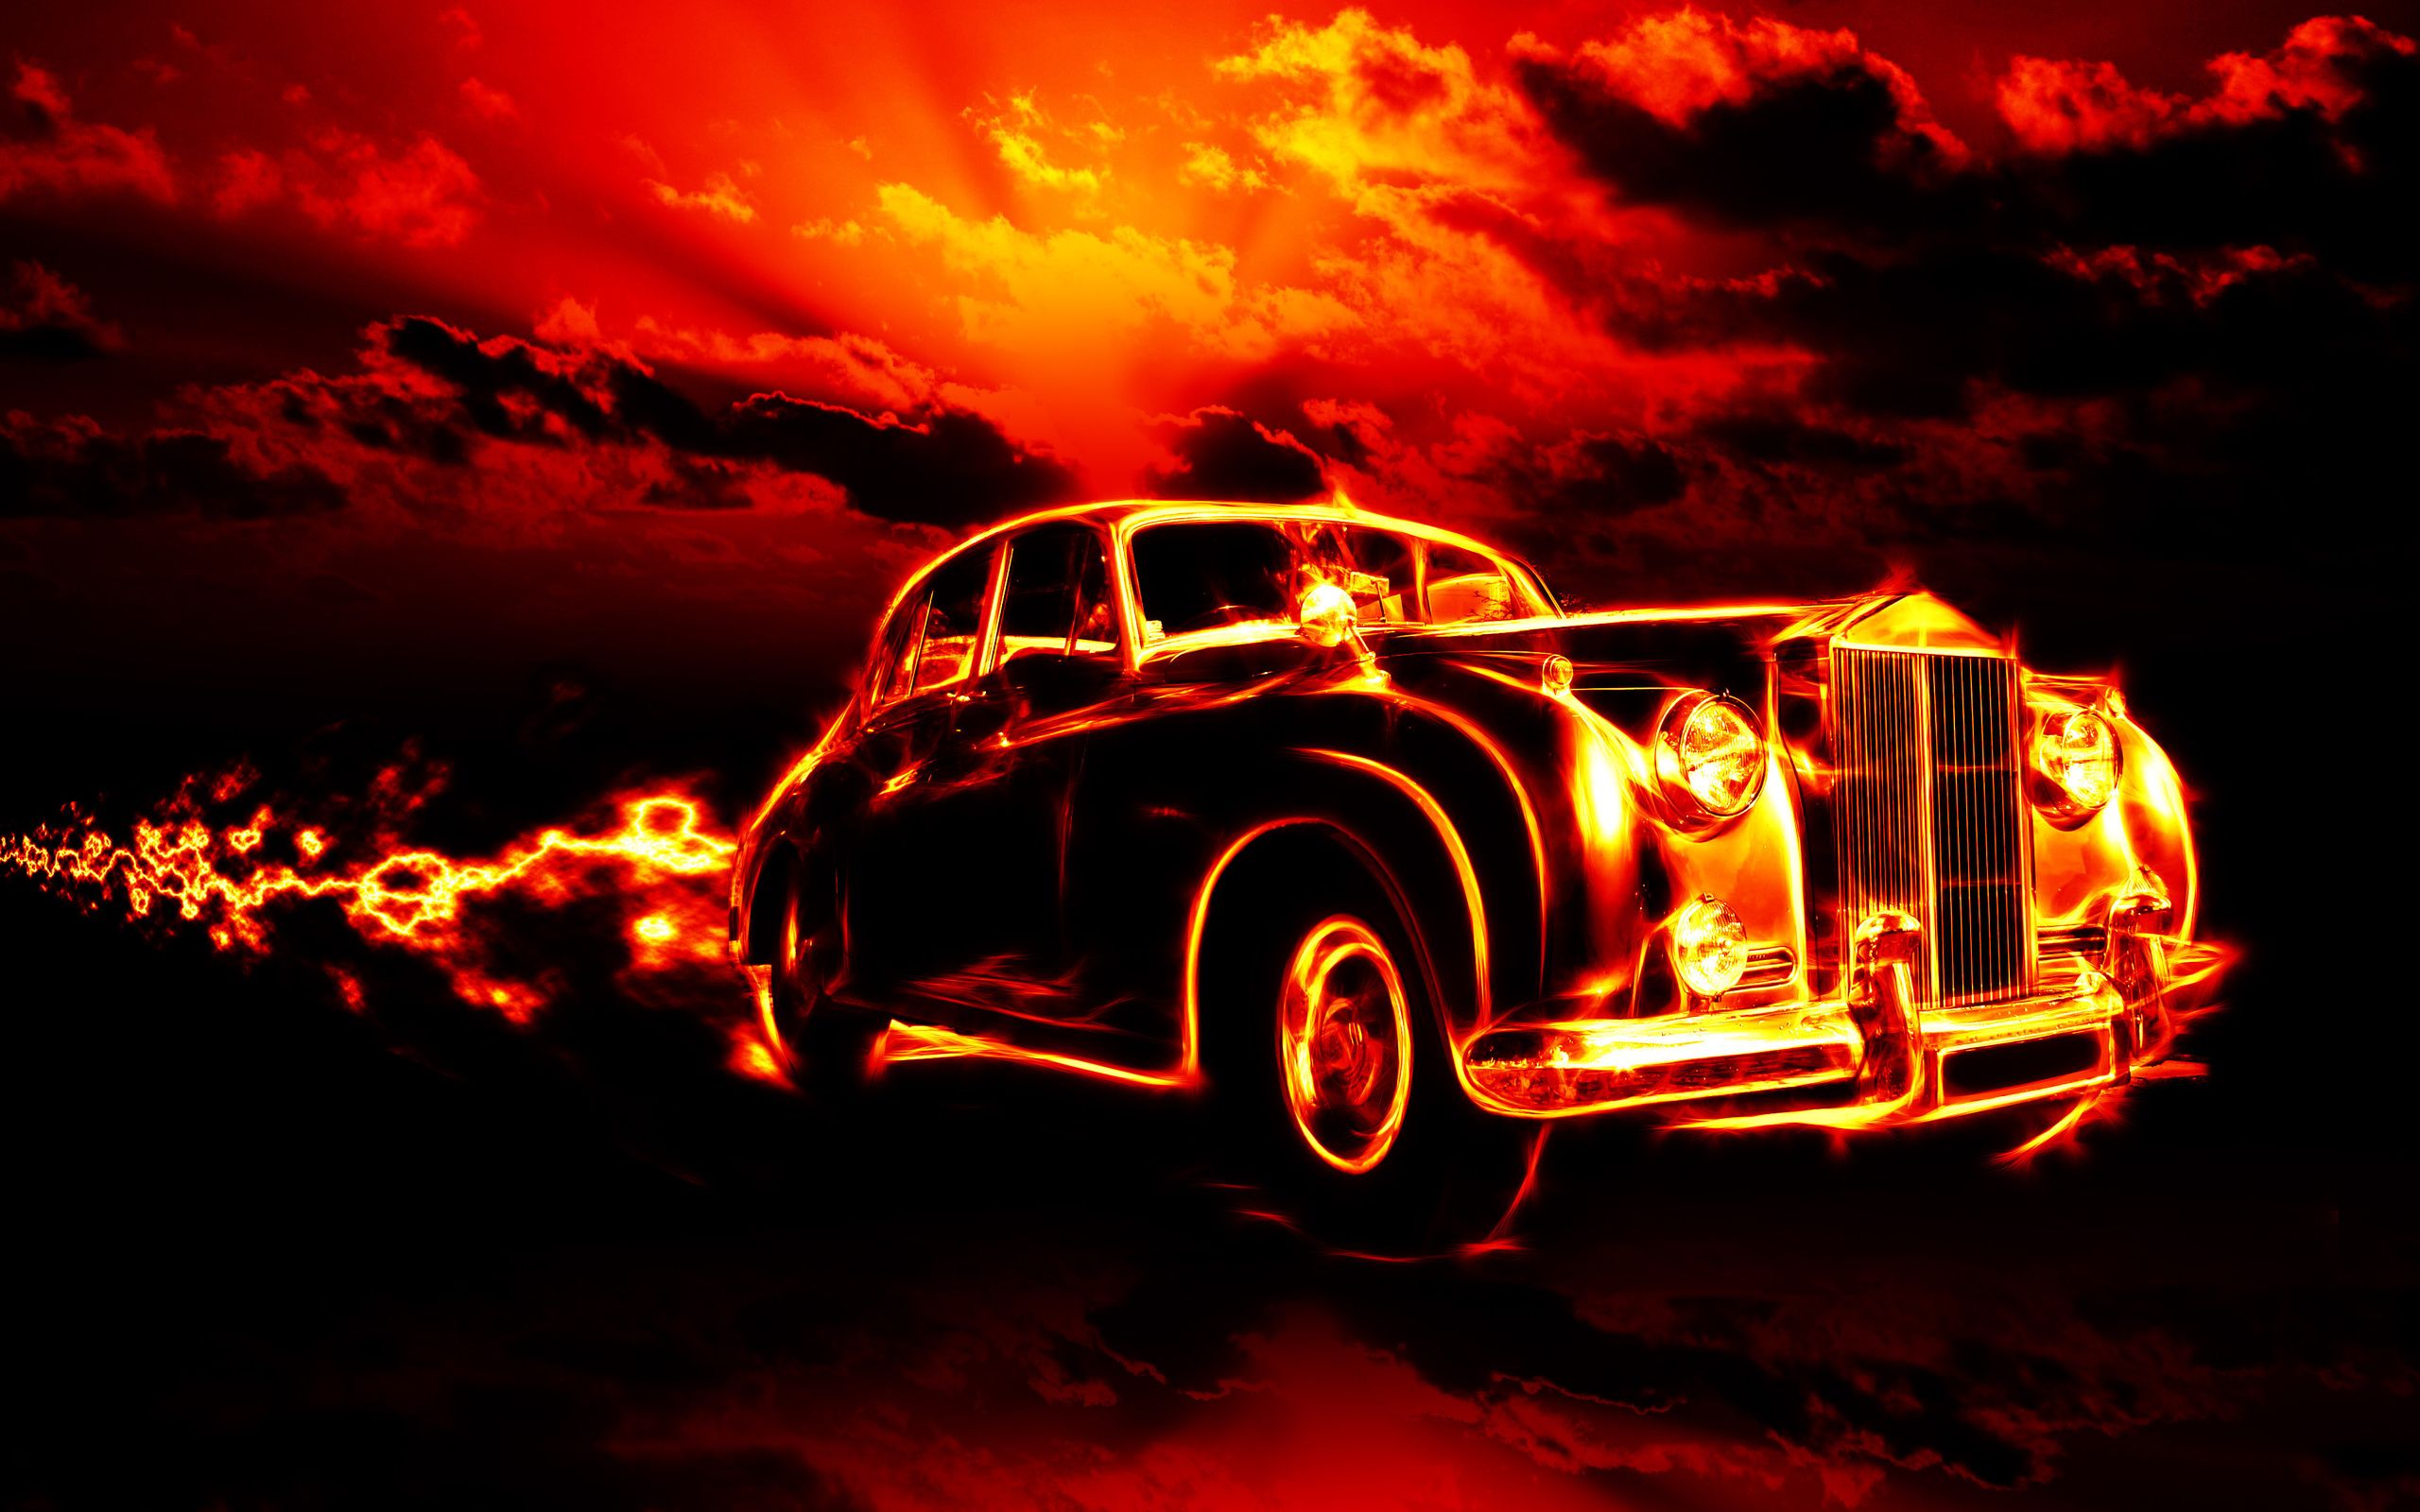 2560x1600 creepy, fire, flame, hell, ghost rider, city, clouds